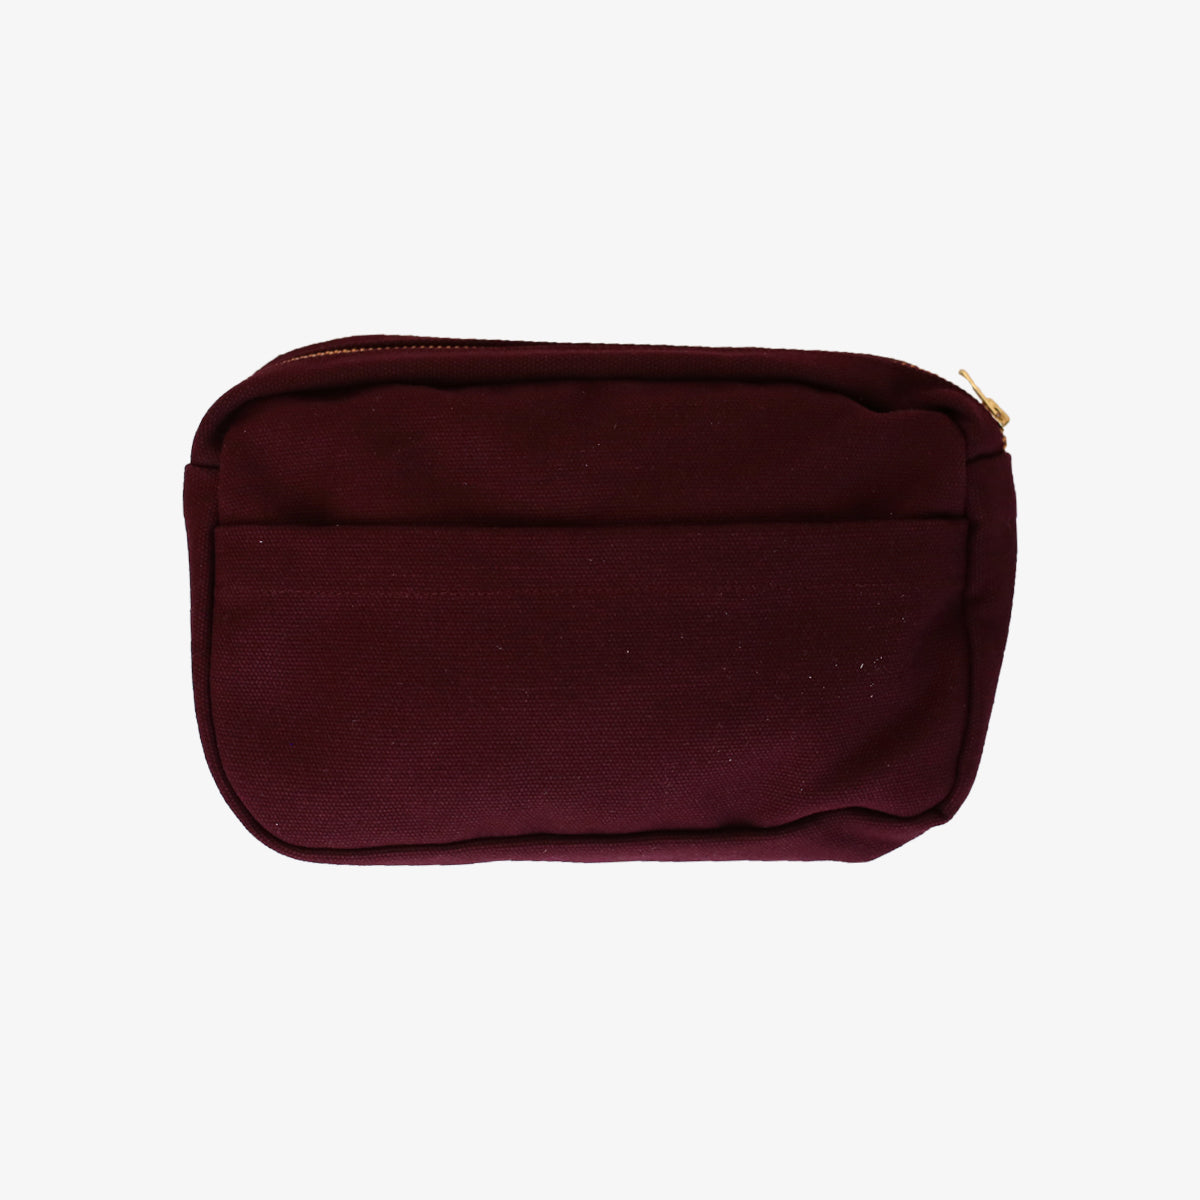 products/Utilitybag_Bordeaux_02.jpg